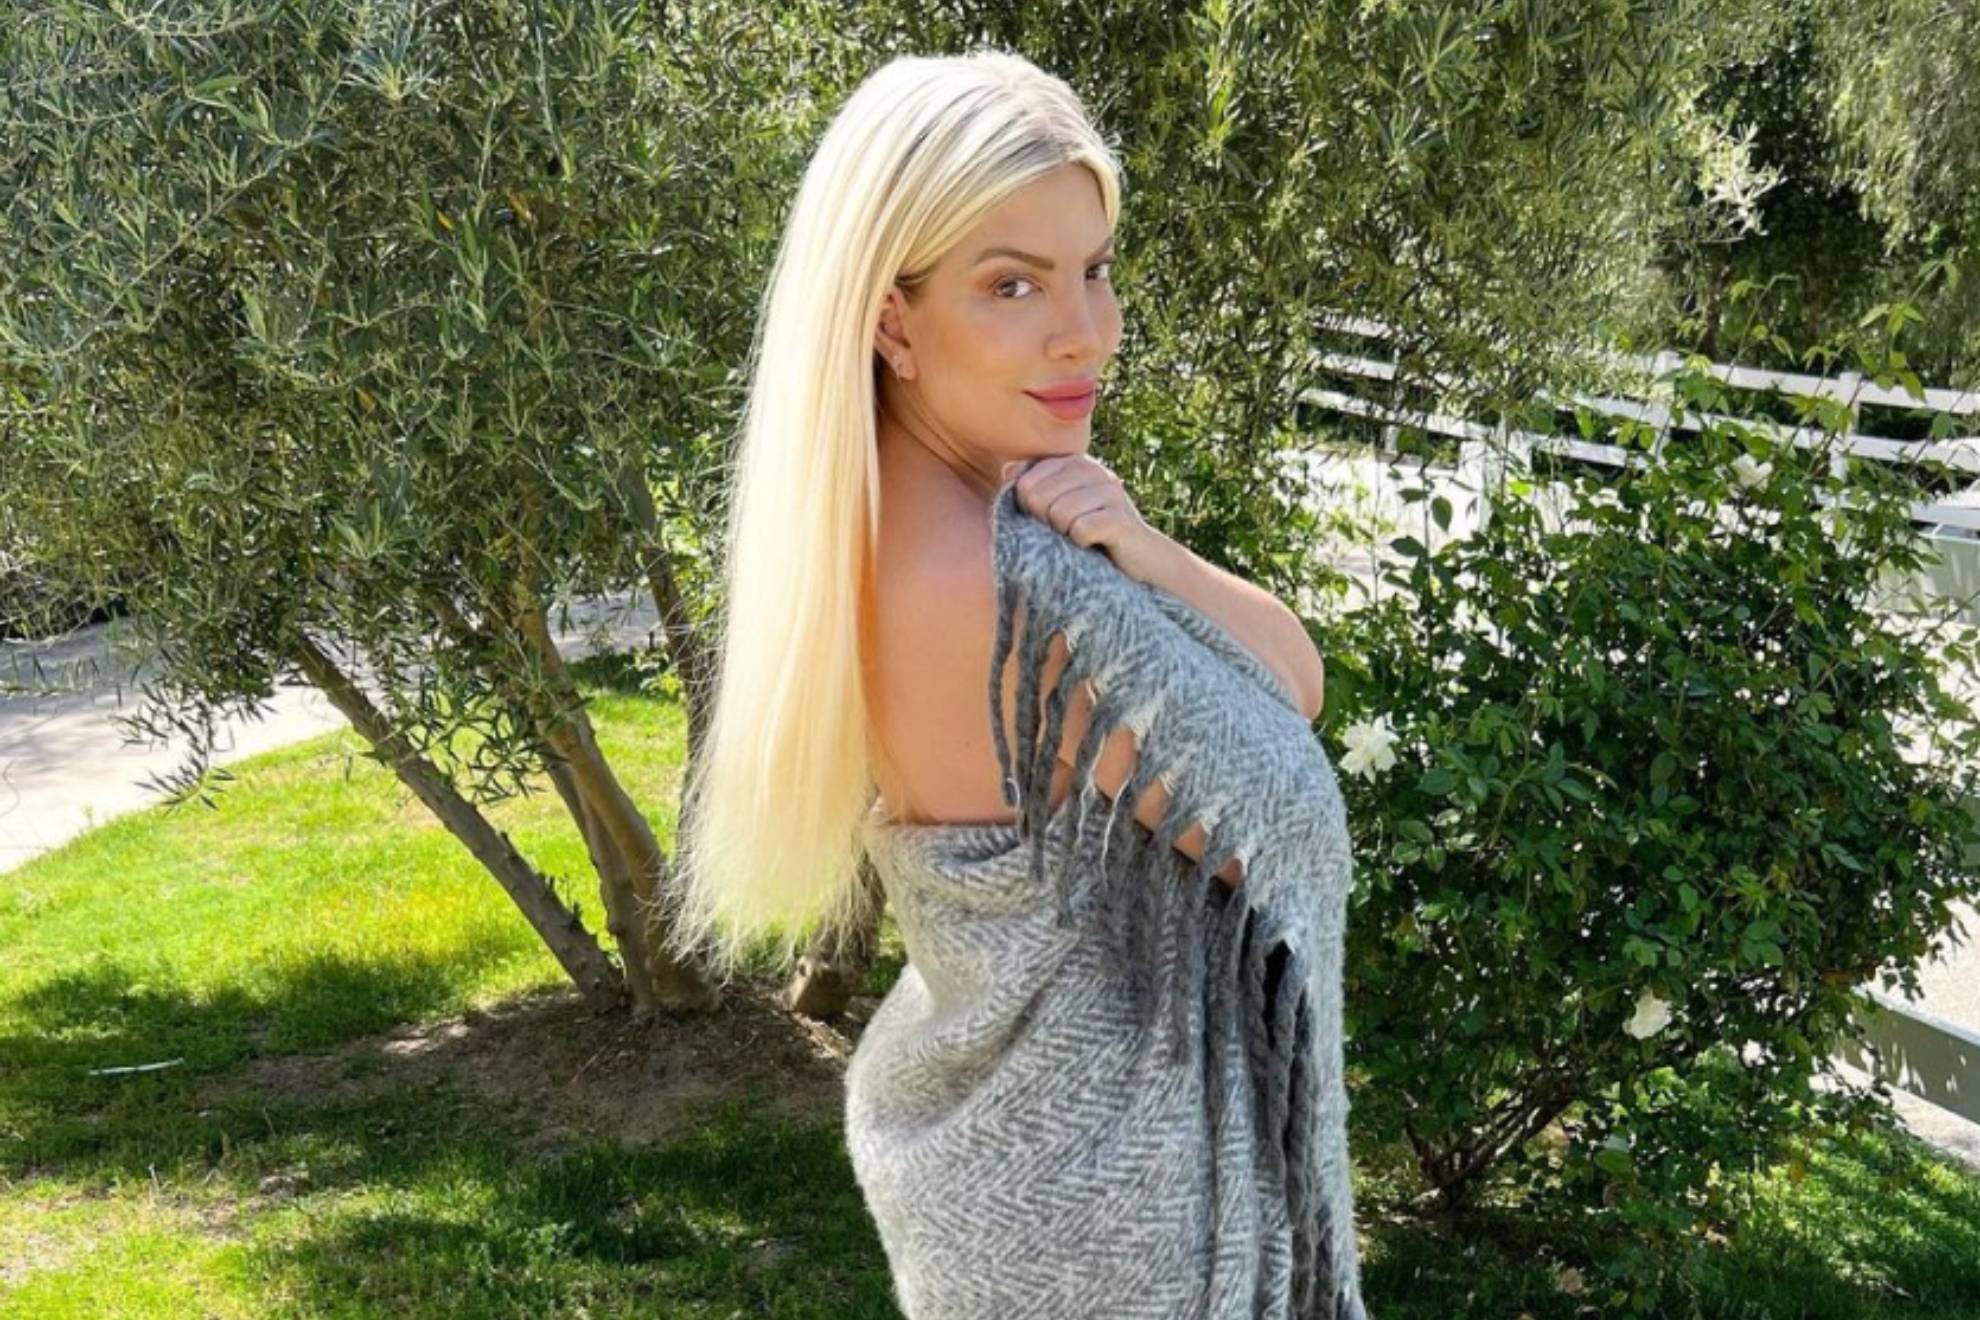 Tori Spelling resumes her social media activity after health problems